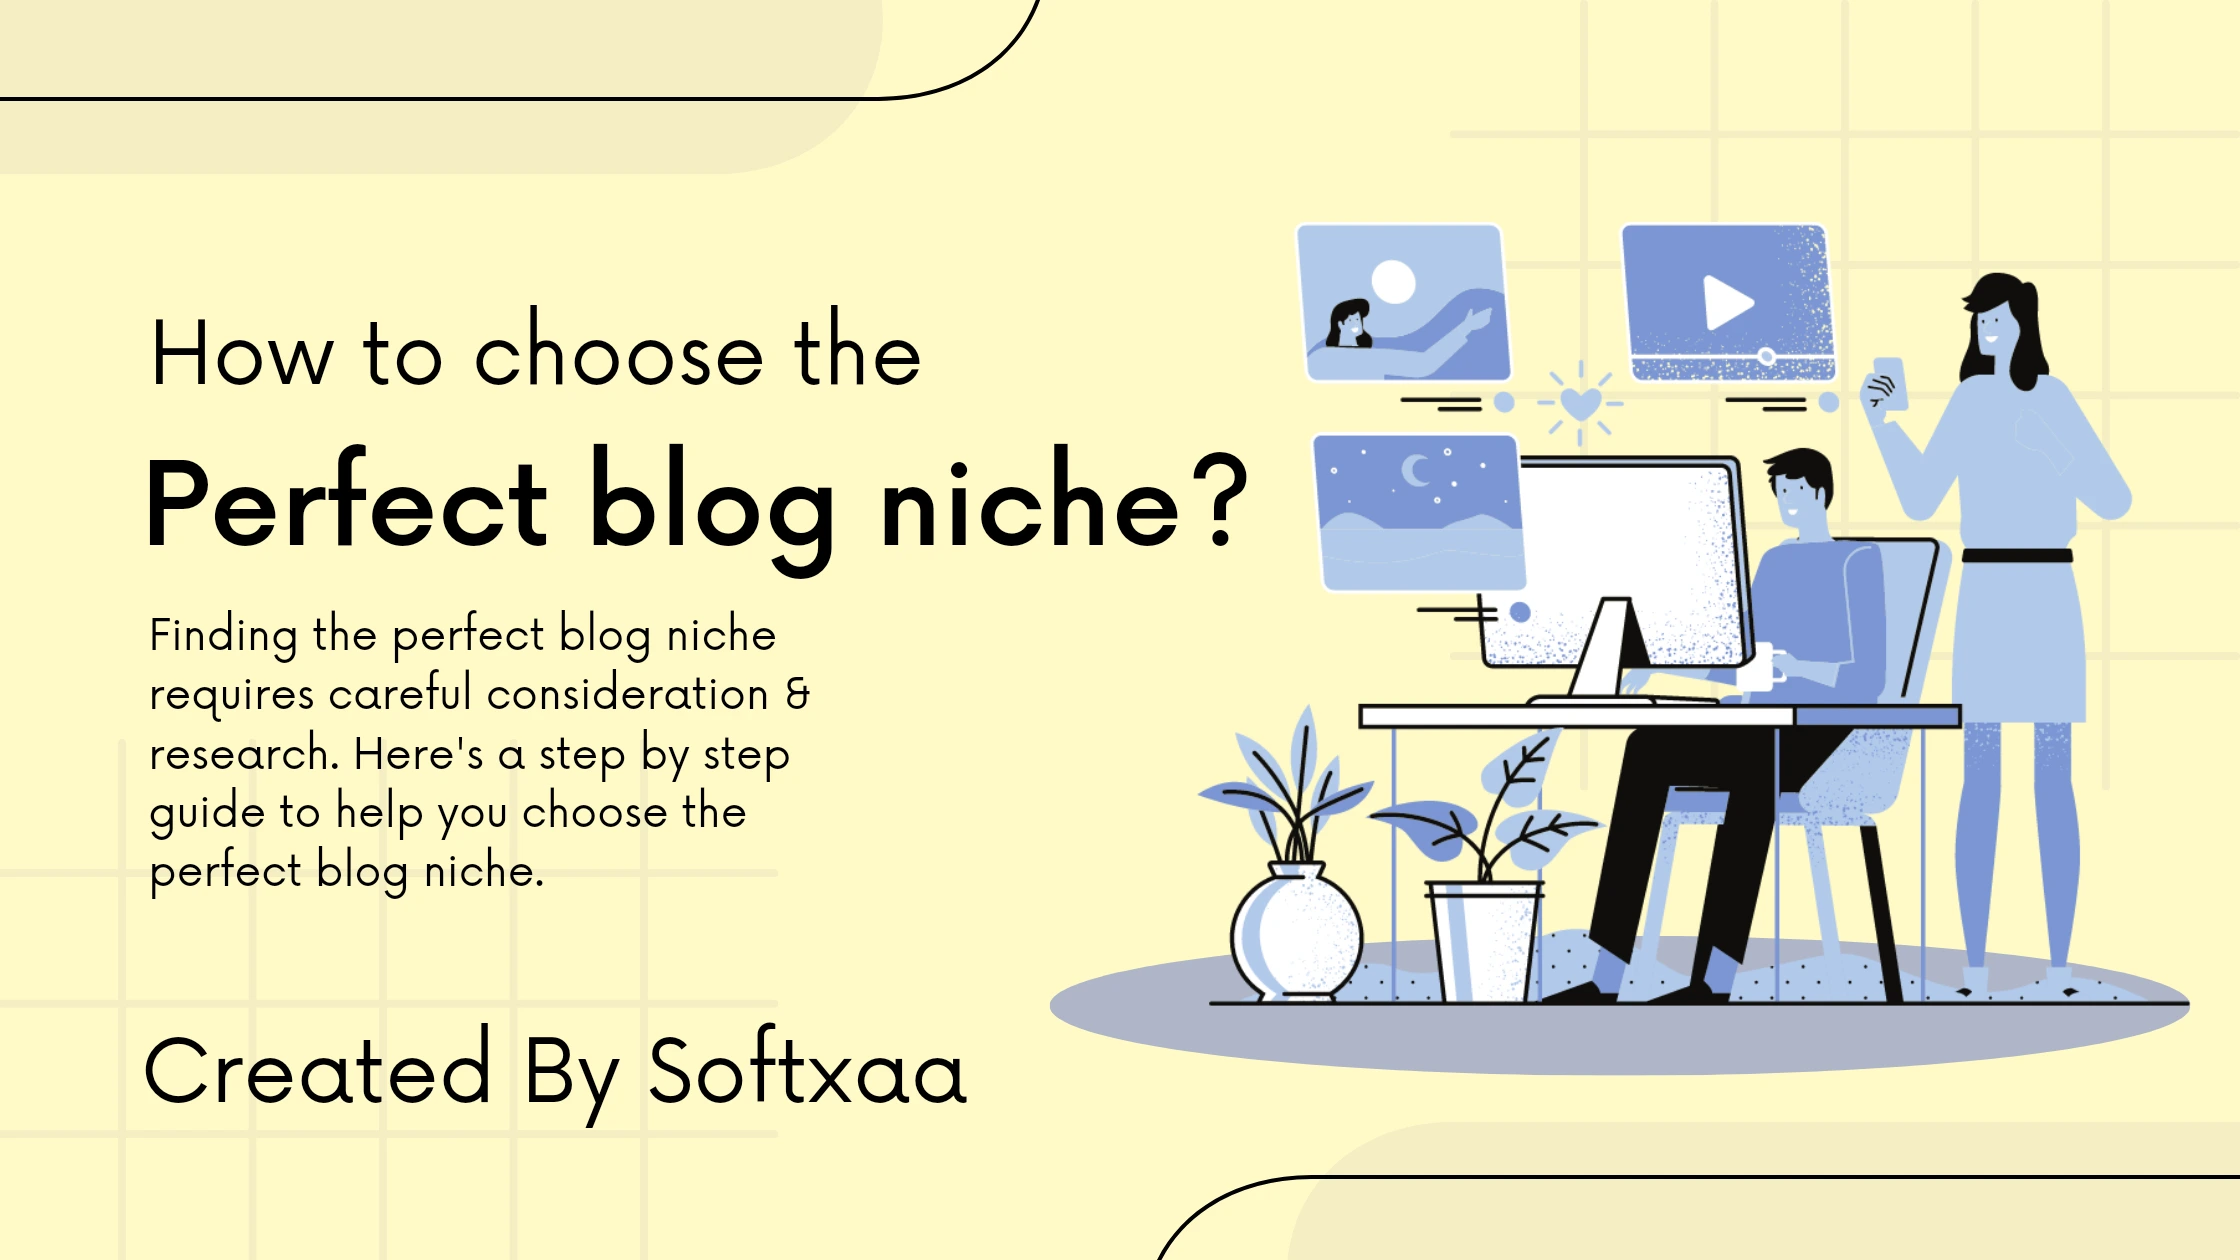 How to Choose the Perfect Blog Niche